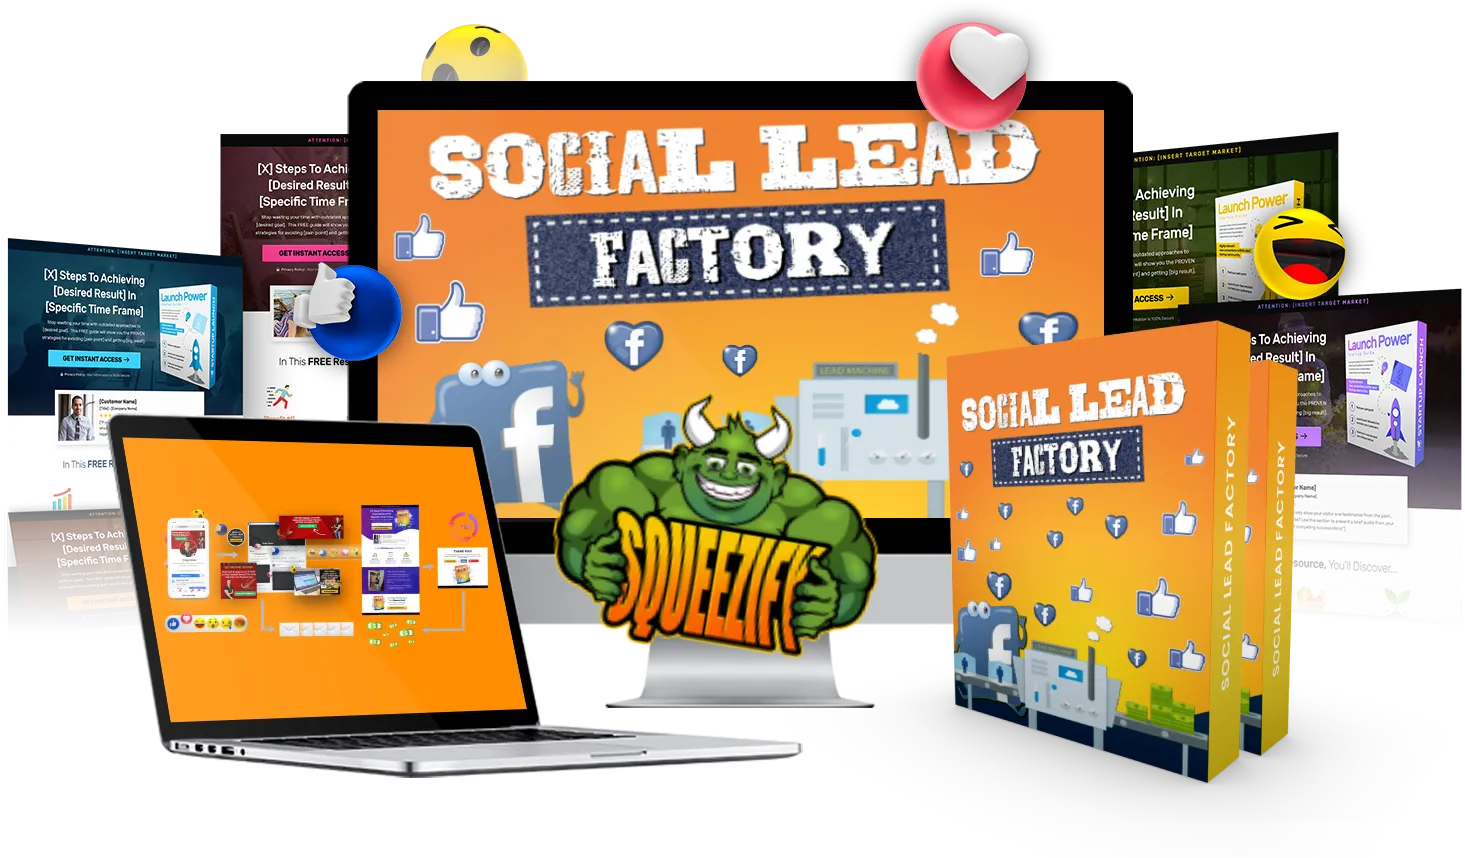 Social Lead Factory Template